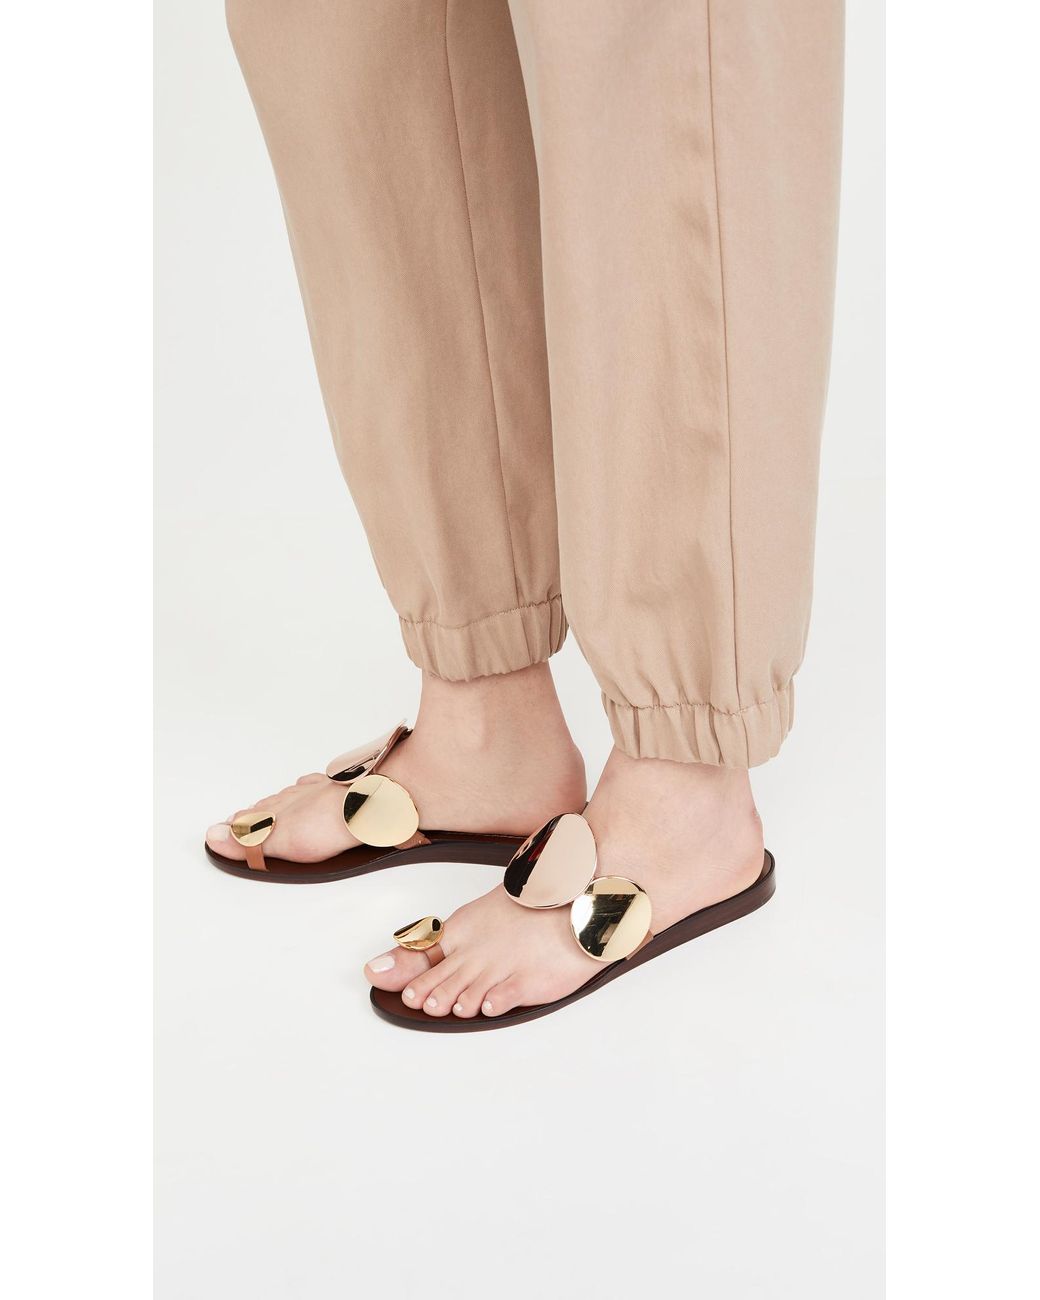 Tory Burch Patos Multi Disk Sandals in Brown | Lyst